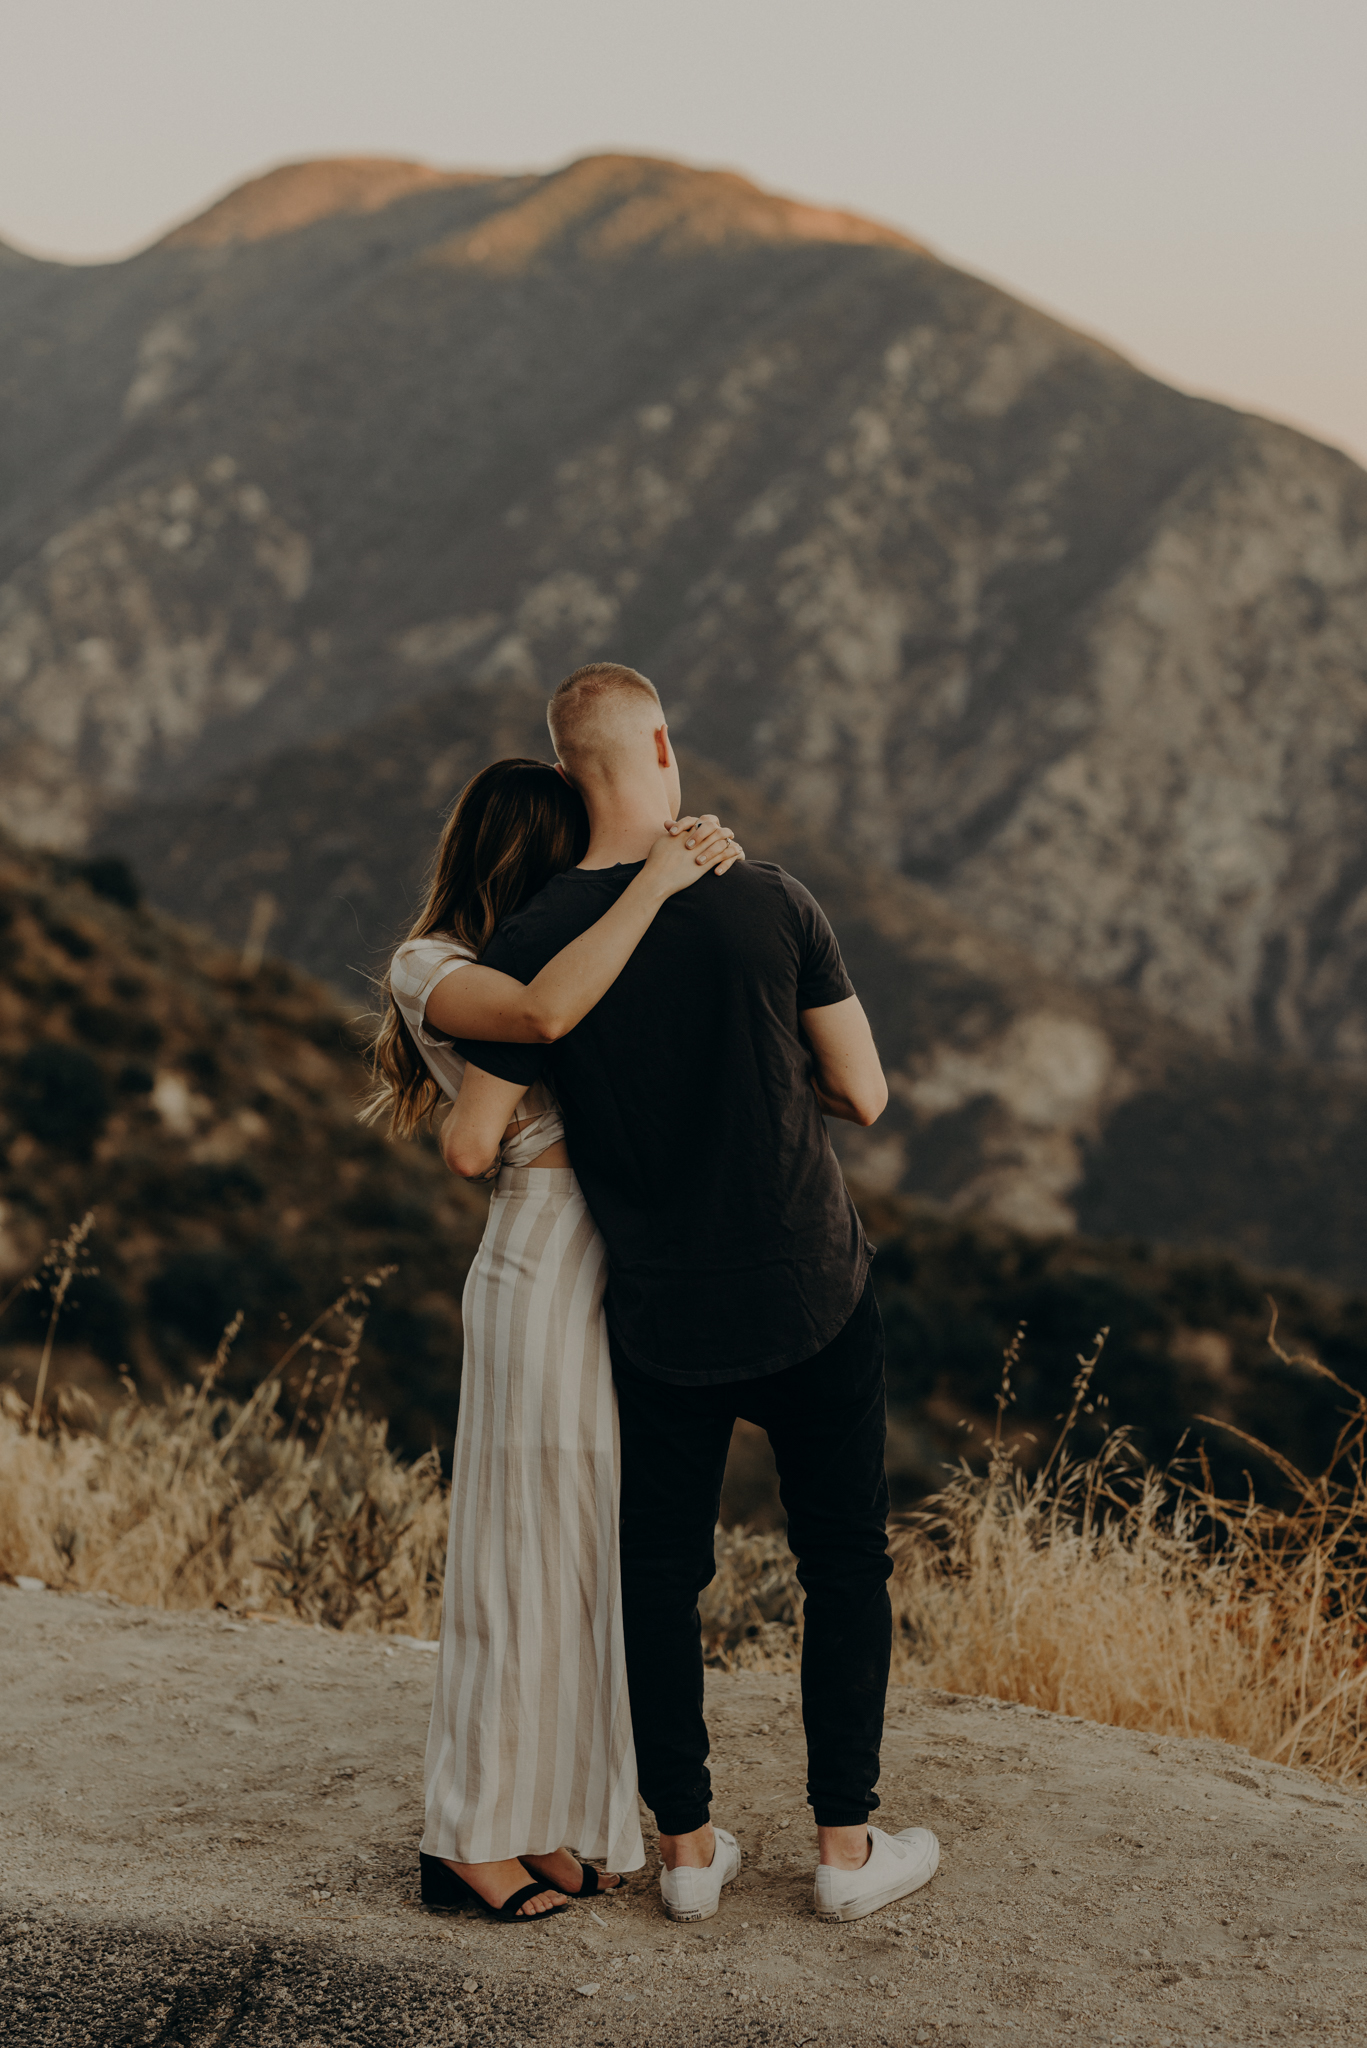 Isaiah + Taylor Photography - Los Angeles Forest Engagement Session - Laid back wedding photographer-012.jpg